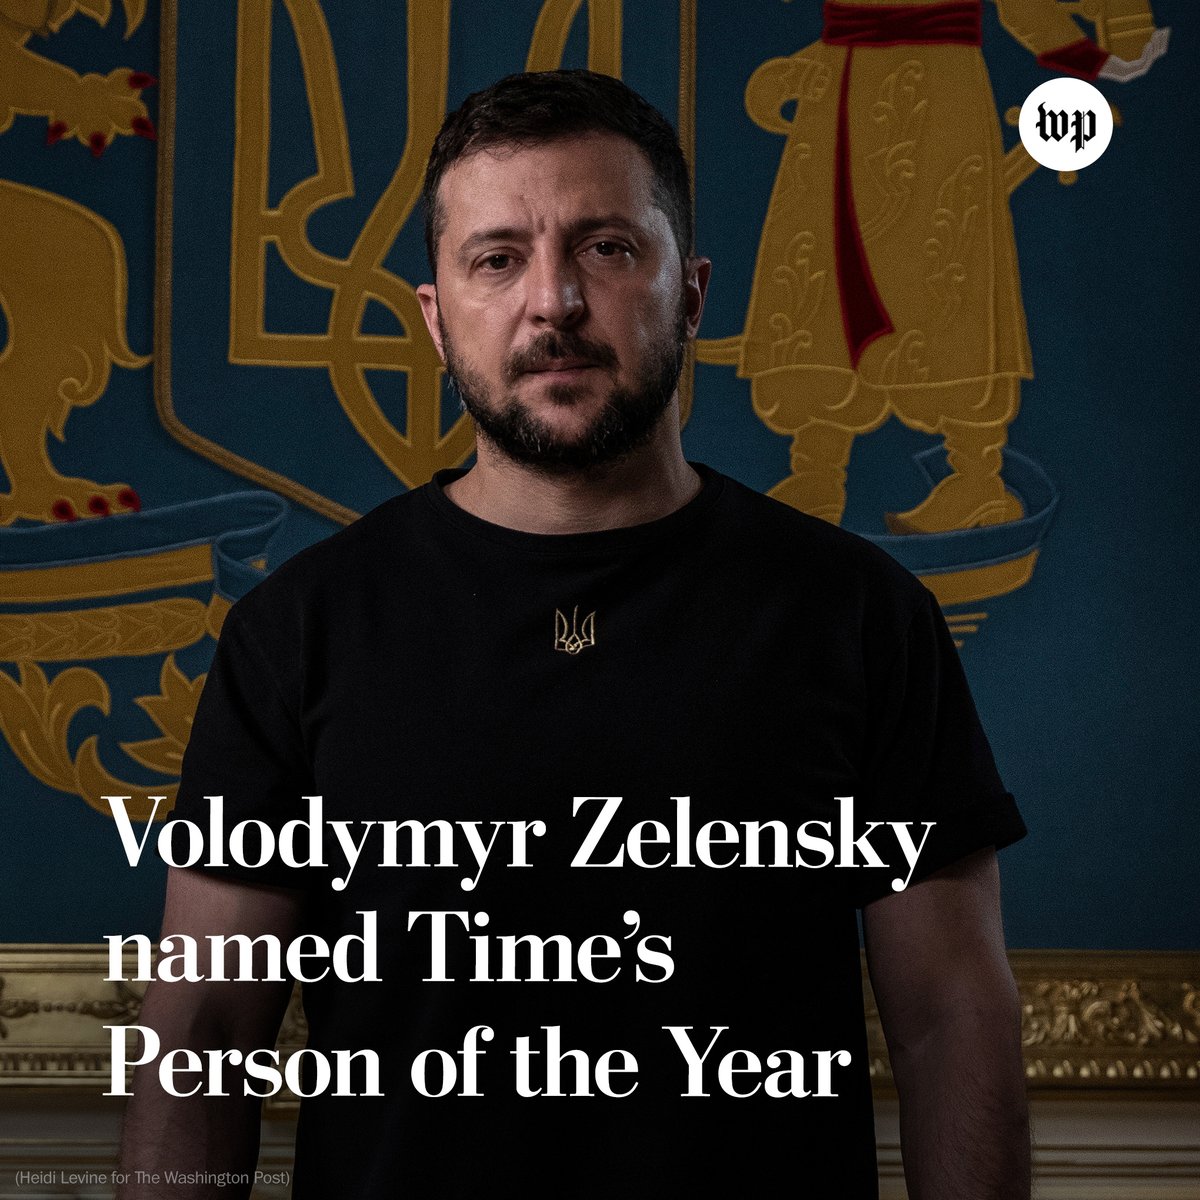 Photo of Ukrainian President Volodymyr Zelensky during an interview with The Washington Post at his office in Kyiv, Ukraine, on Aug. 8, 2022. (Photo by Heidi Levine for The Washington Post). Headline reads, "Volodymyr Zelensky named Time’s Person of the Year for 2022"